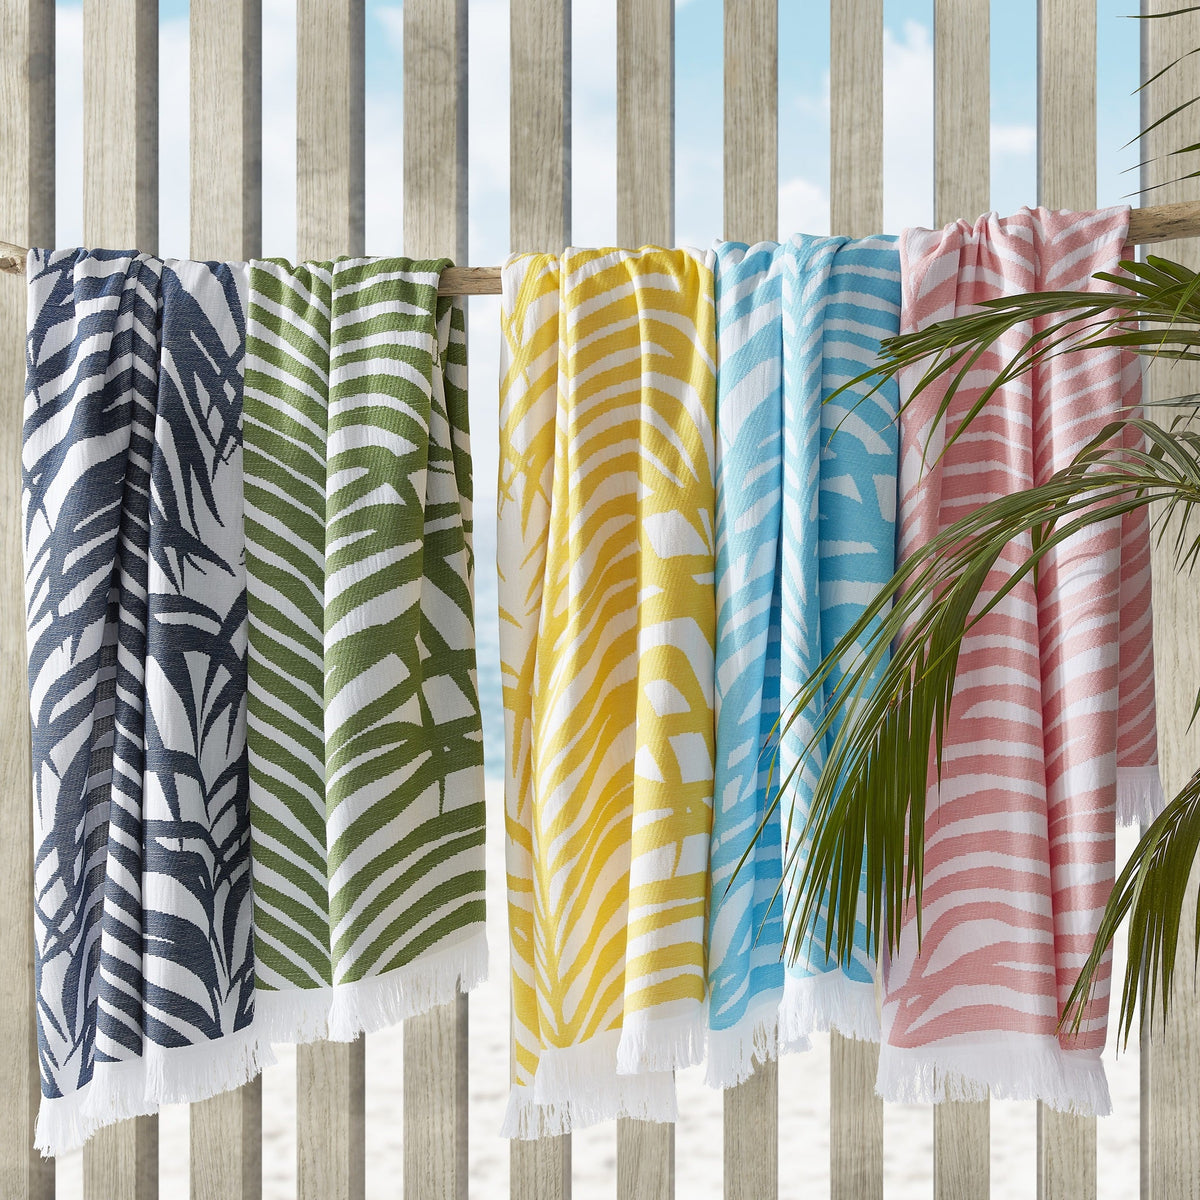 Hanging Matouk Zebra Palm Beach Towels in Different Colors